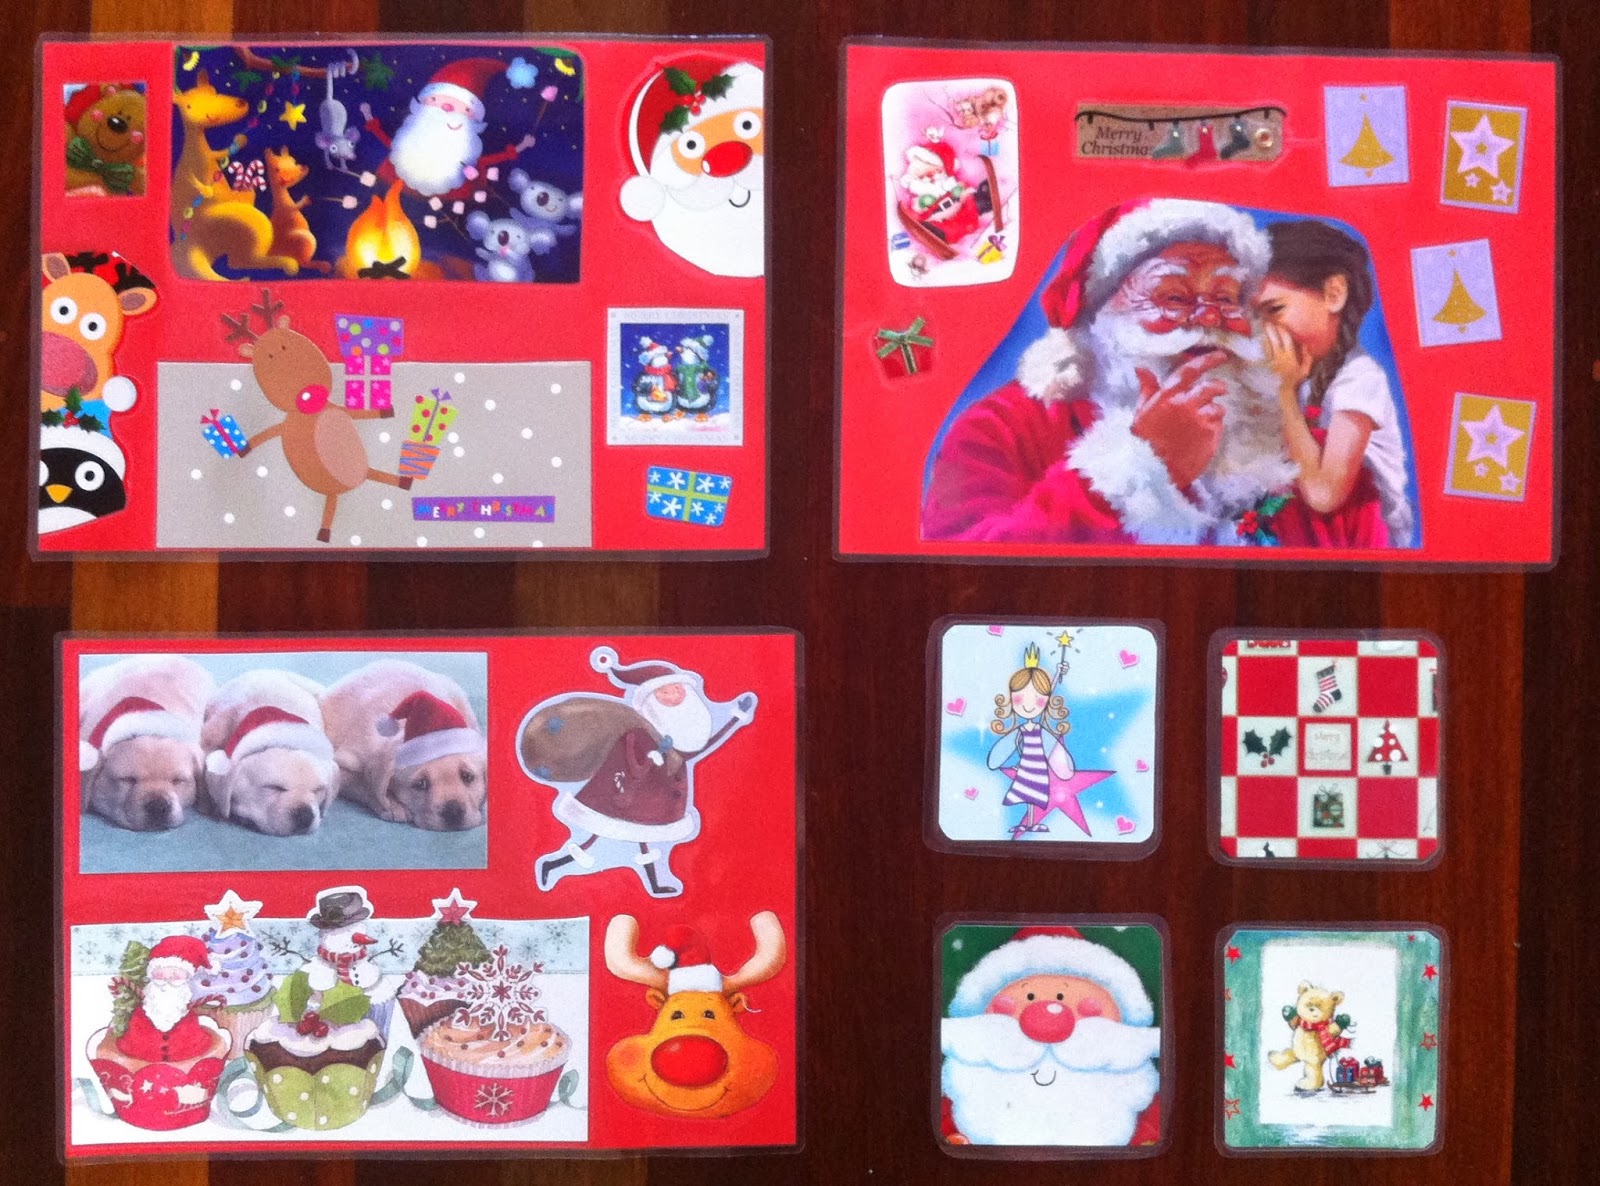 Kids Activities Tips 4 Everyday Christmas Placemats Coasters Using Christmas Cards